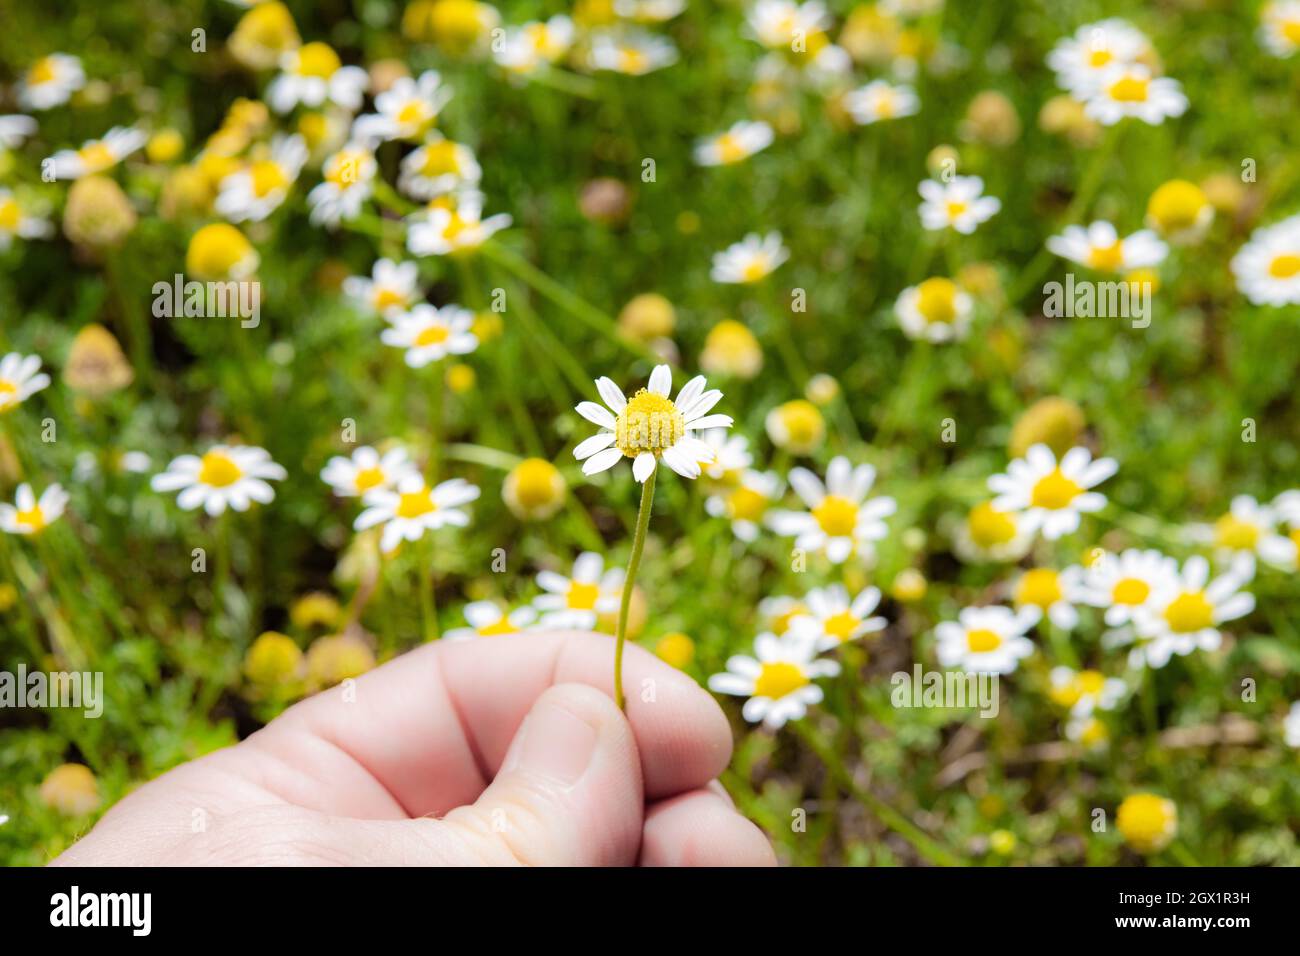 Cropped Hand Holding Flowers Against Plants Stock Photo